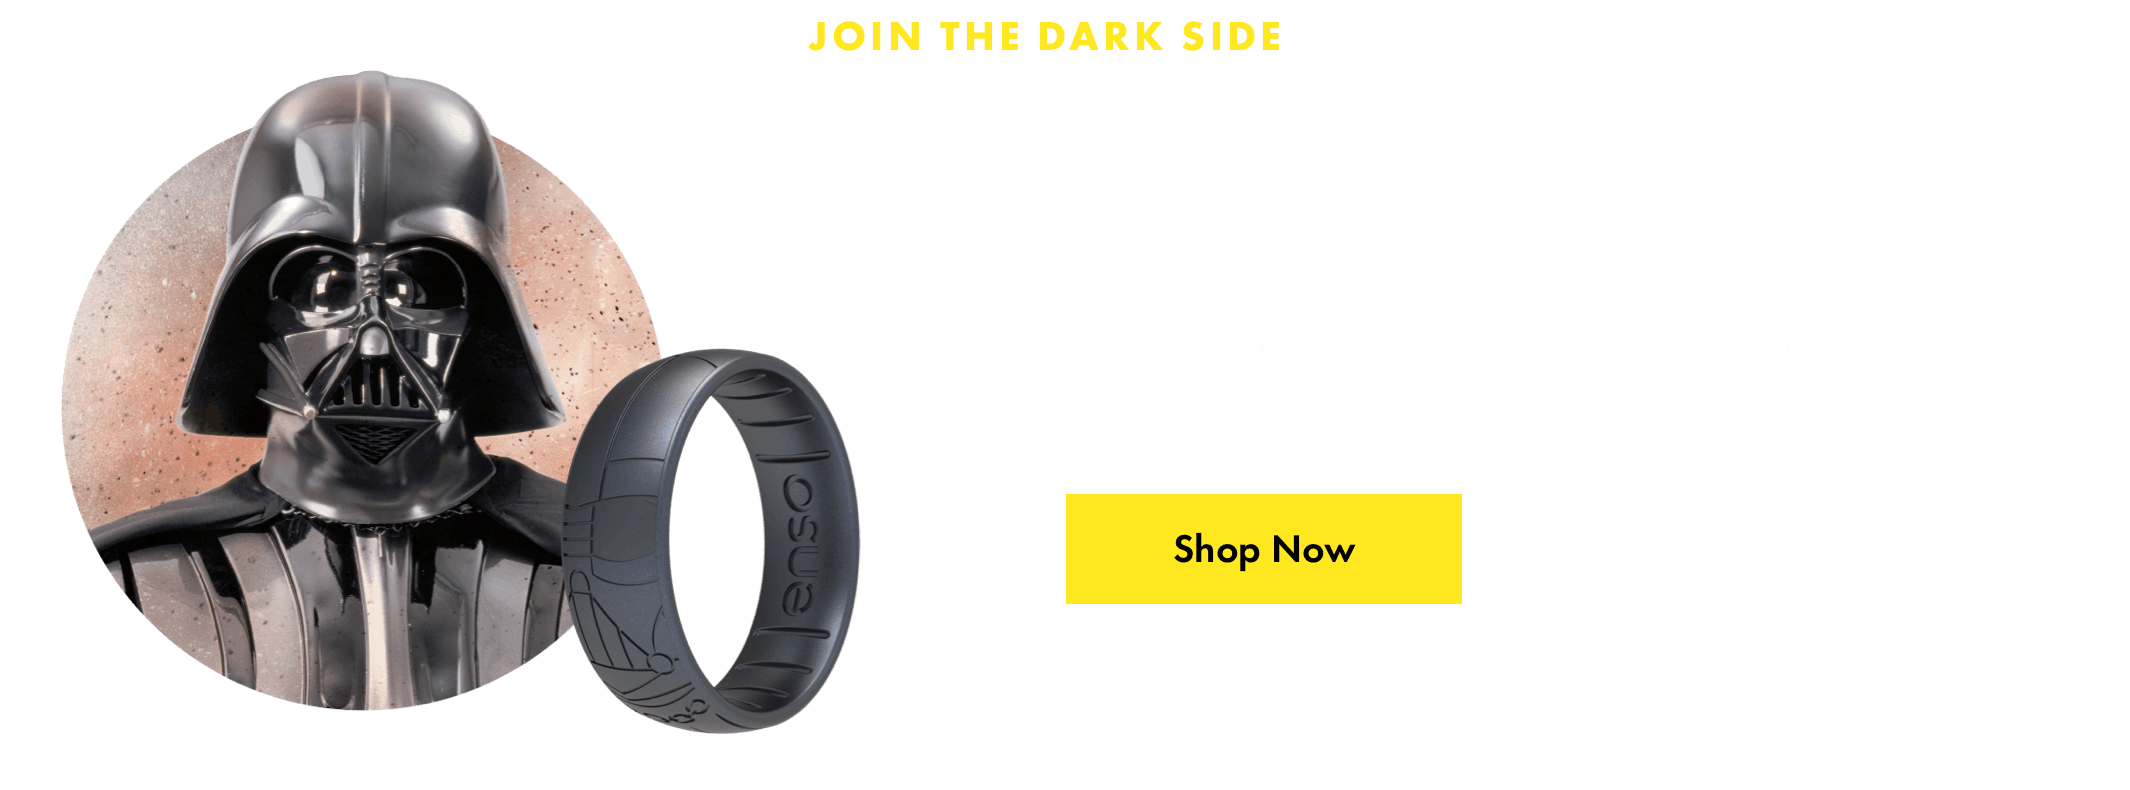 Darth Vader™ ring. Channel your inner dark side with a ring featuring the notorious Jedi turned Sith lord. Click here to shop now.